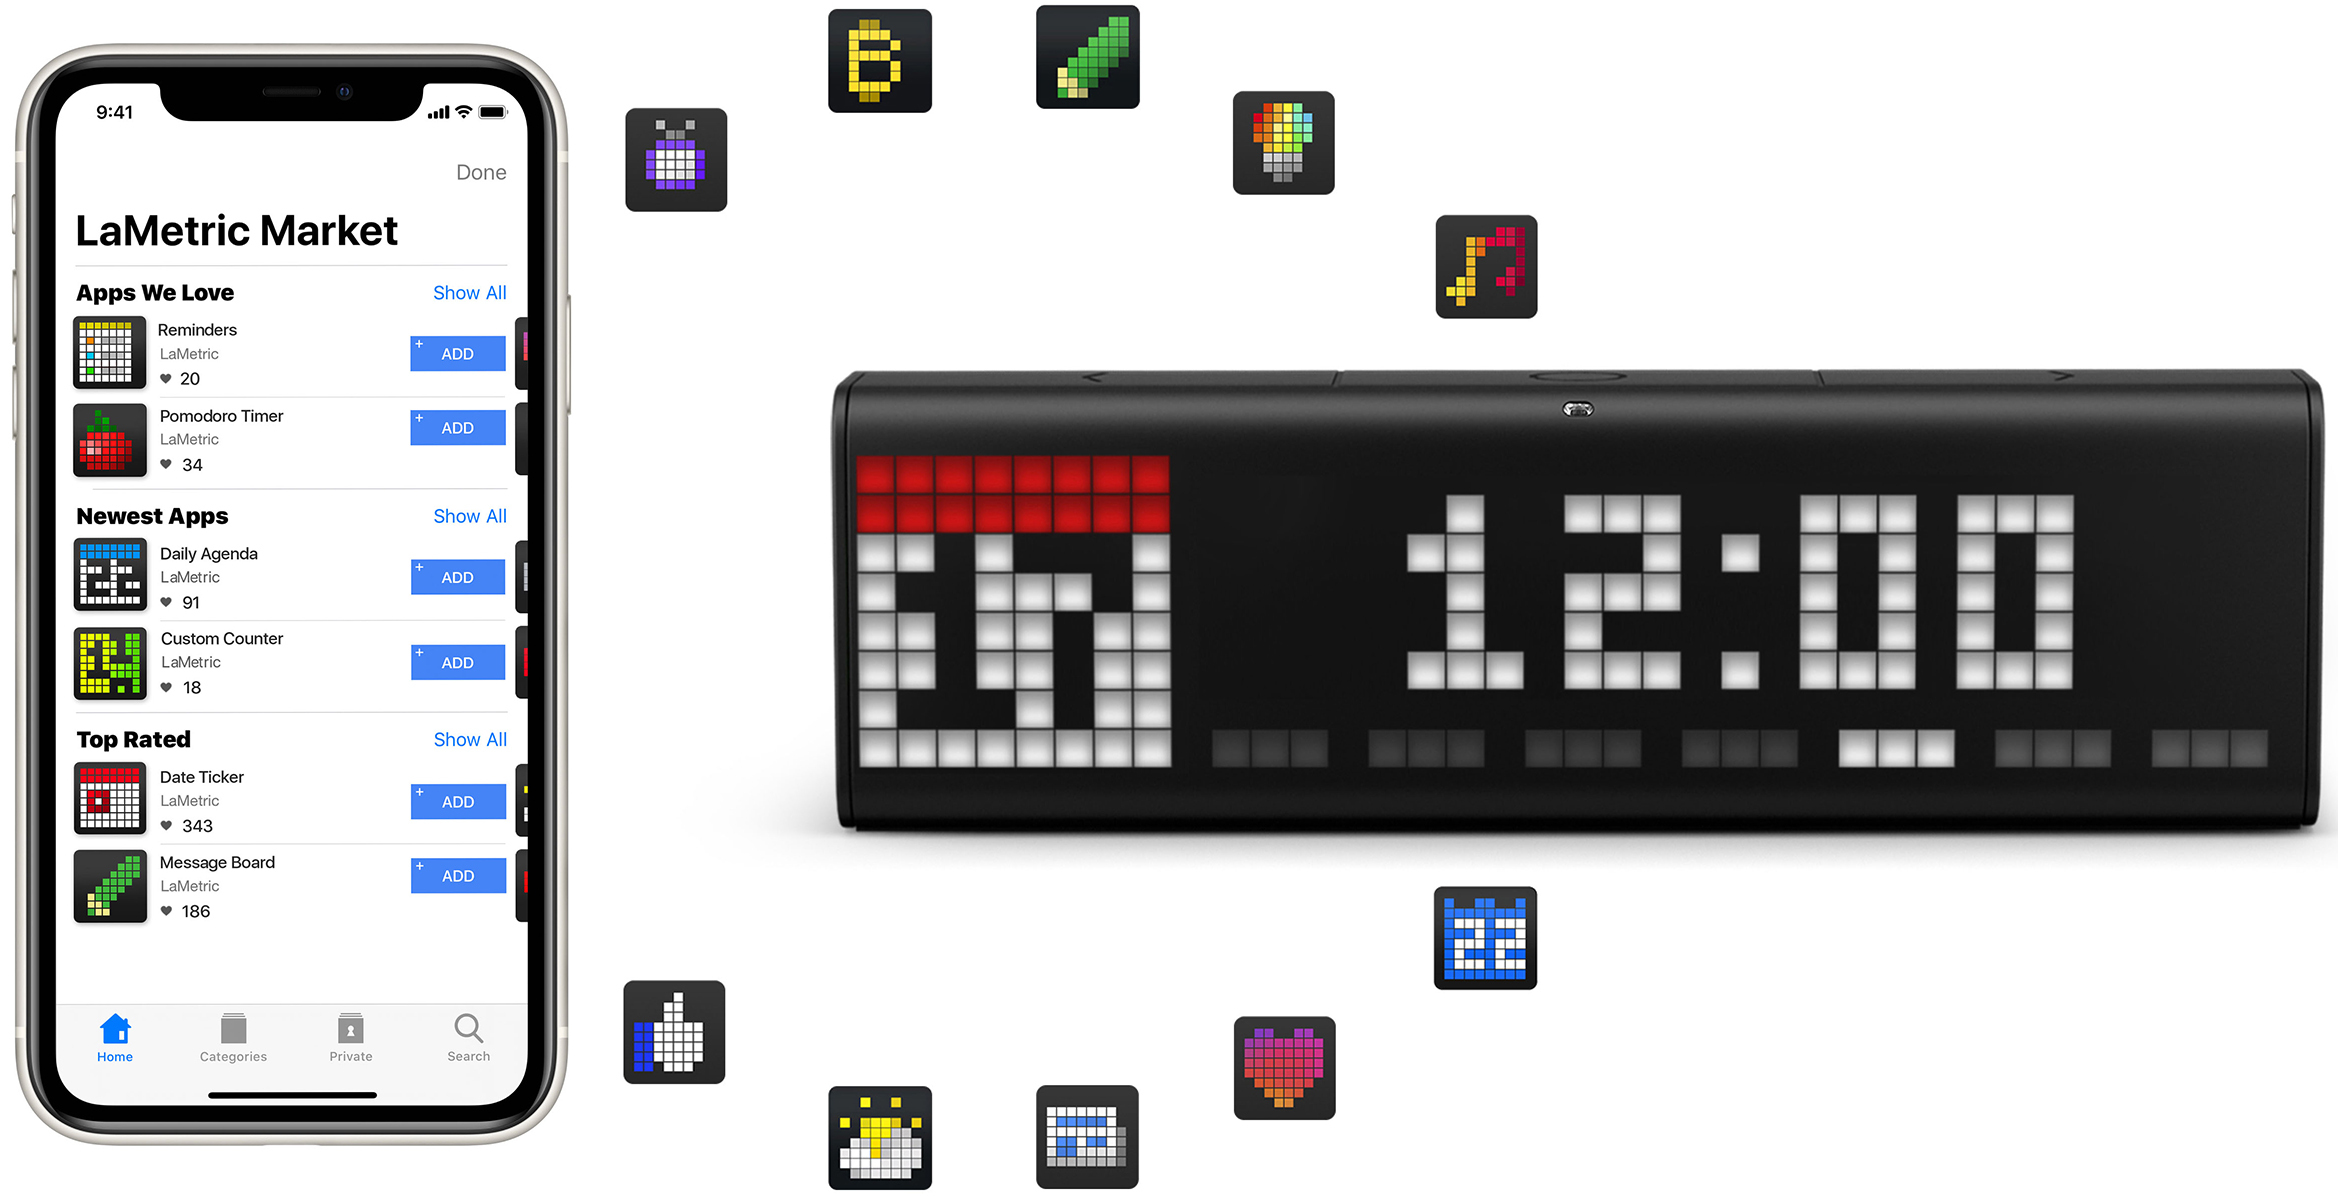 LaMetric Time digital clock displays time and the current date as a clock face and iPhone shows product appstore